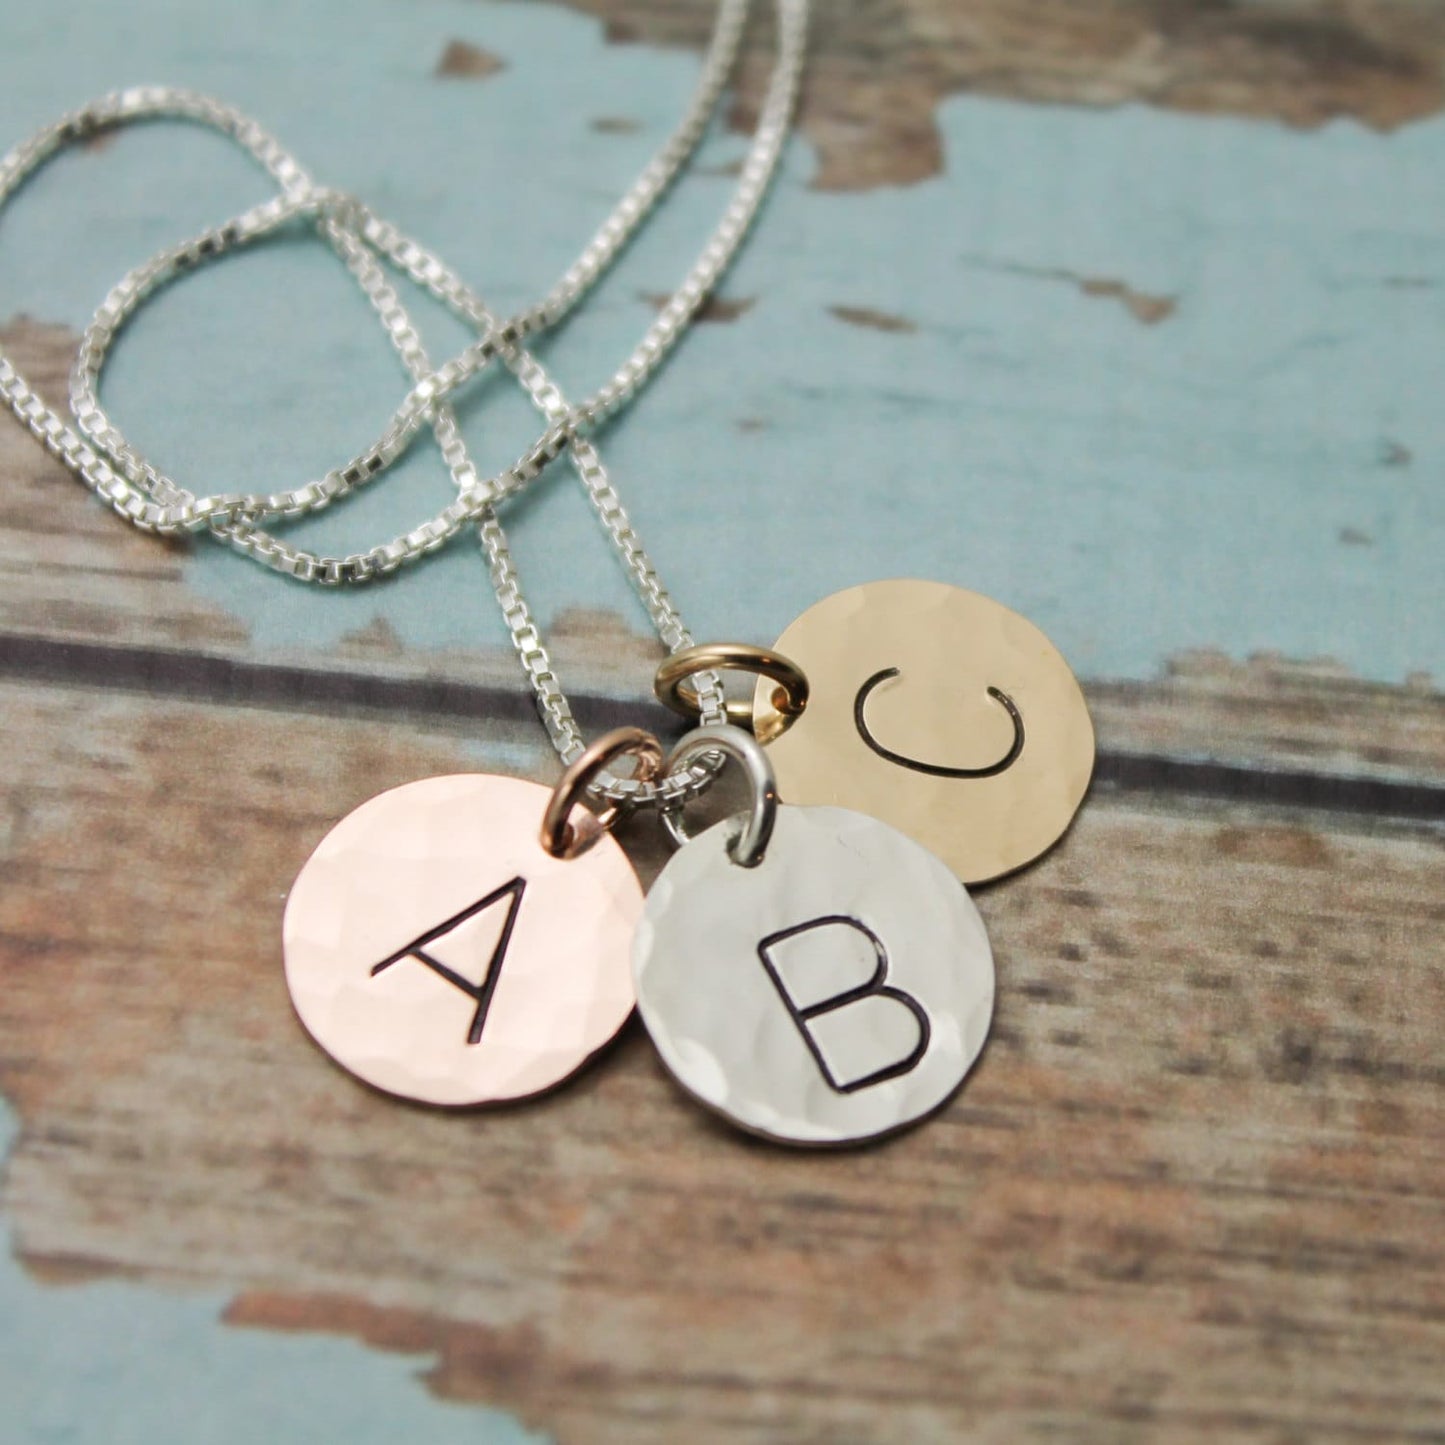 Mom Jewelry, Personalized Necklace, Initial Necklace, Monogram Necklace, Simple Necklace, Personalized Gift Idea, Gold, Rose Gold, Silver